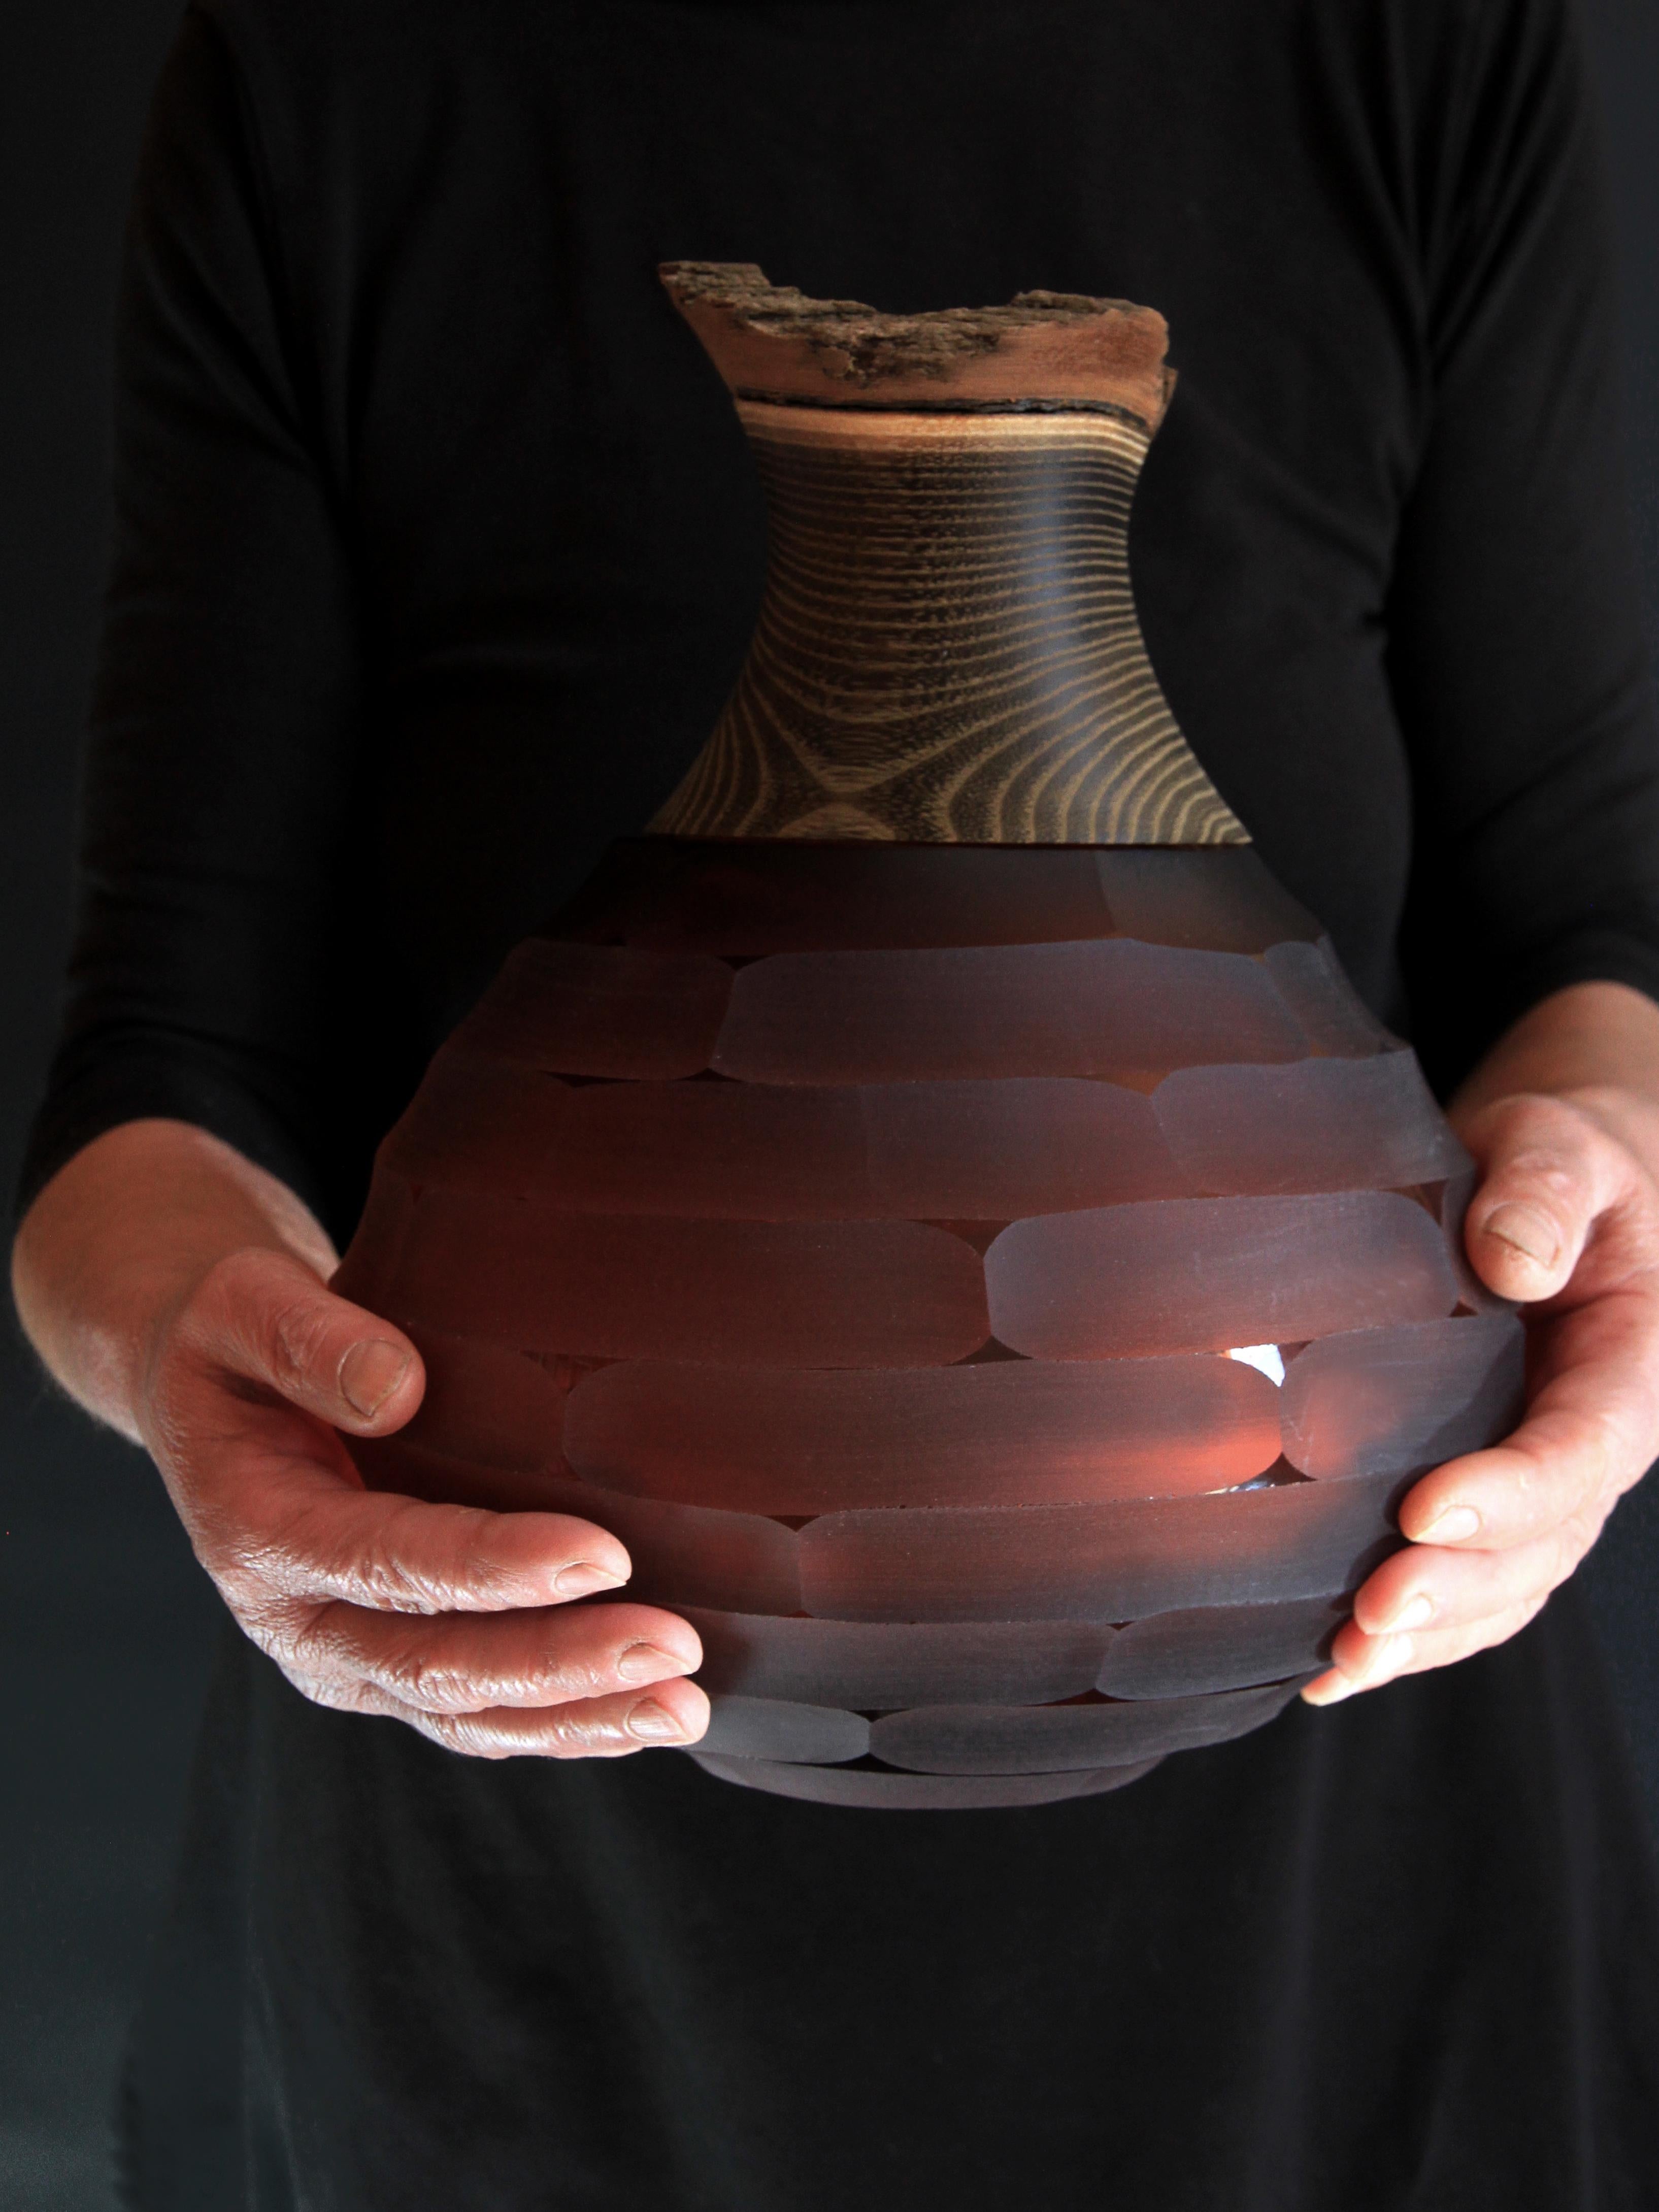 Blown Glass and Brass Sculpt Stacking Vessel, Pia Wüstenberg
Dimensions: height 30cm, diameter 23cm.
Both rough and refined, this assortment plays with the multiple metamorphosis glass grants as a material. The glass is first hand blown, and then